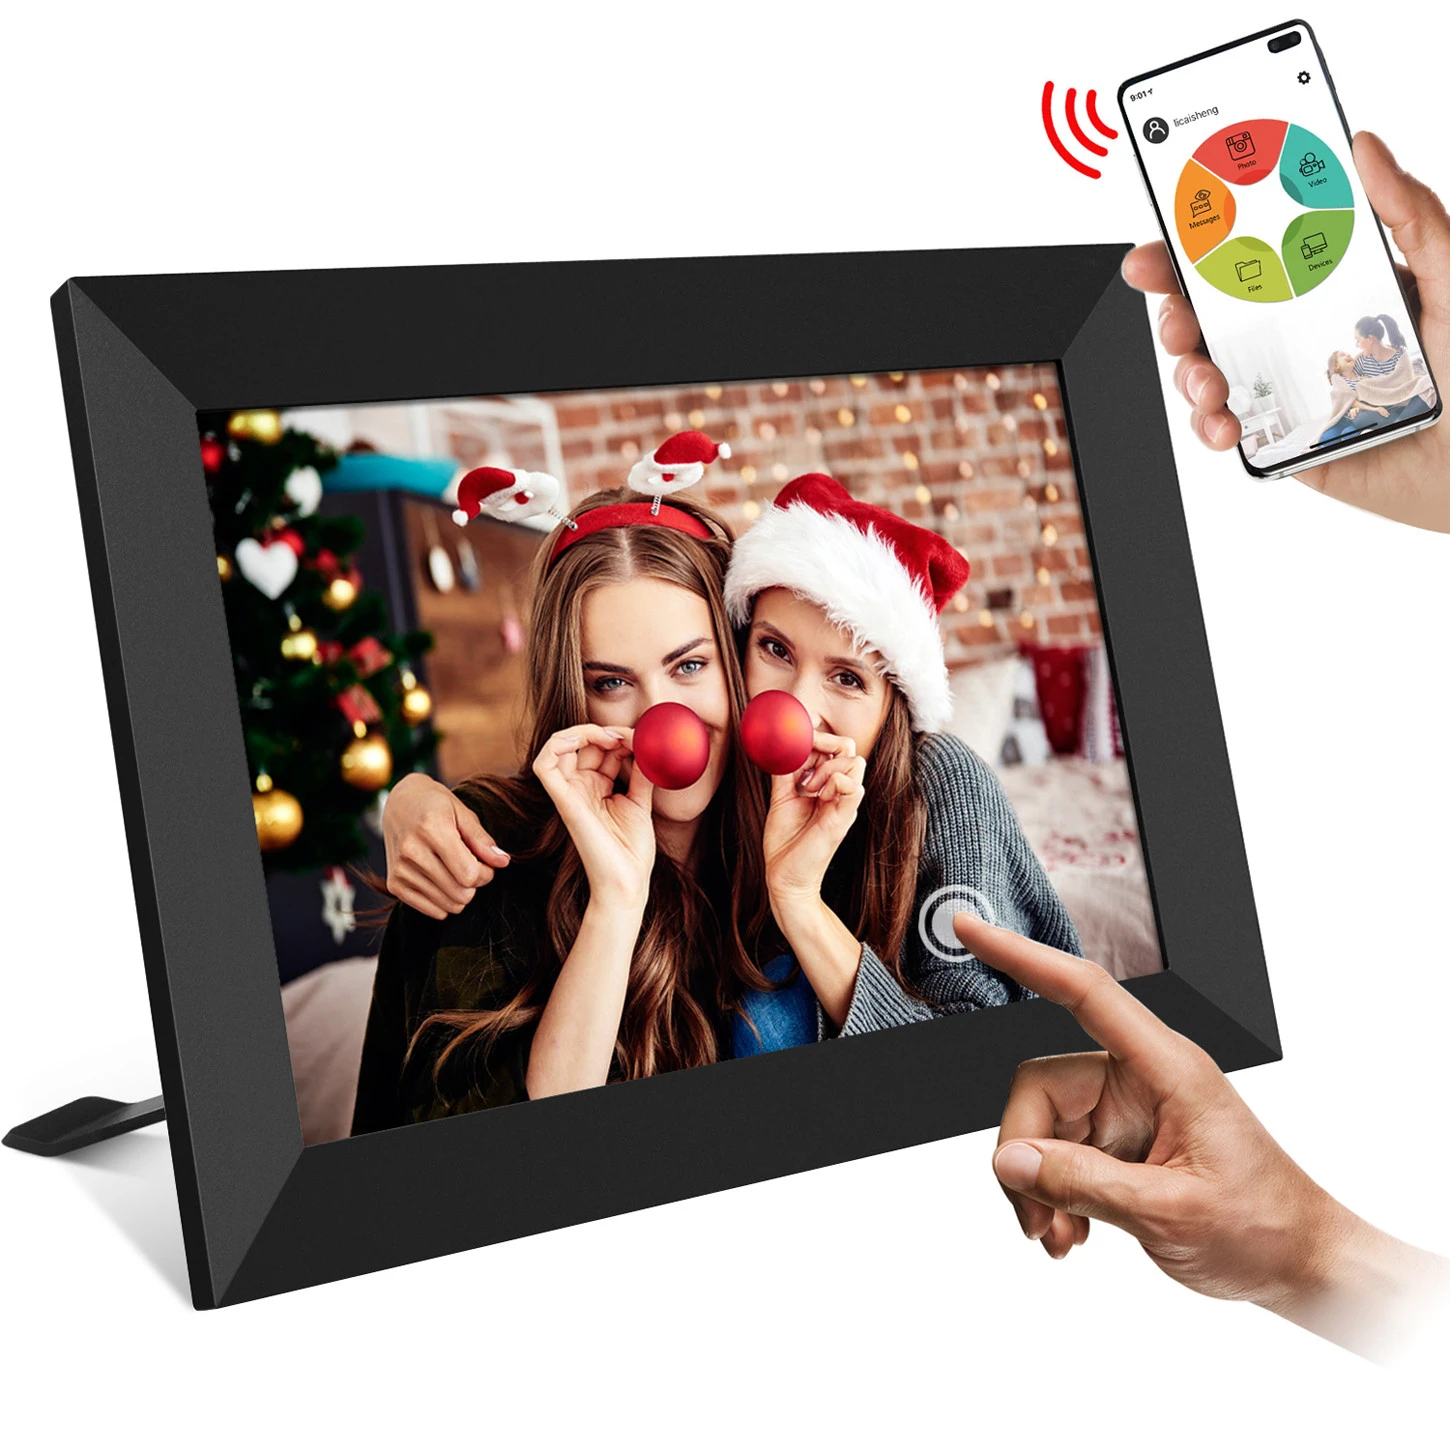 Christmas gift Frameo APP Amazon best selling 10.1 inch  Electronic Album Picture Video MP4 Movie Player Digital Photo Frame